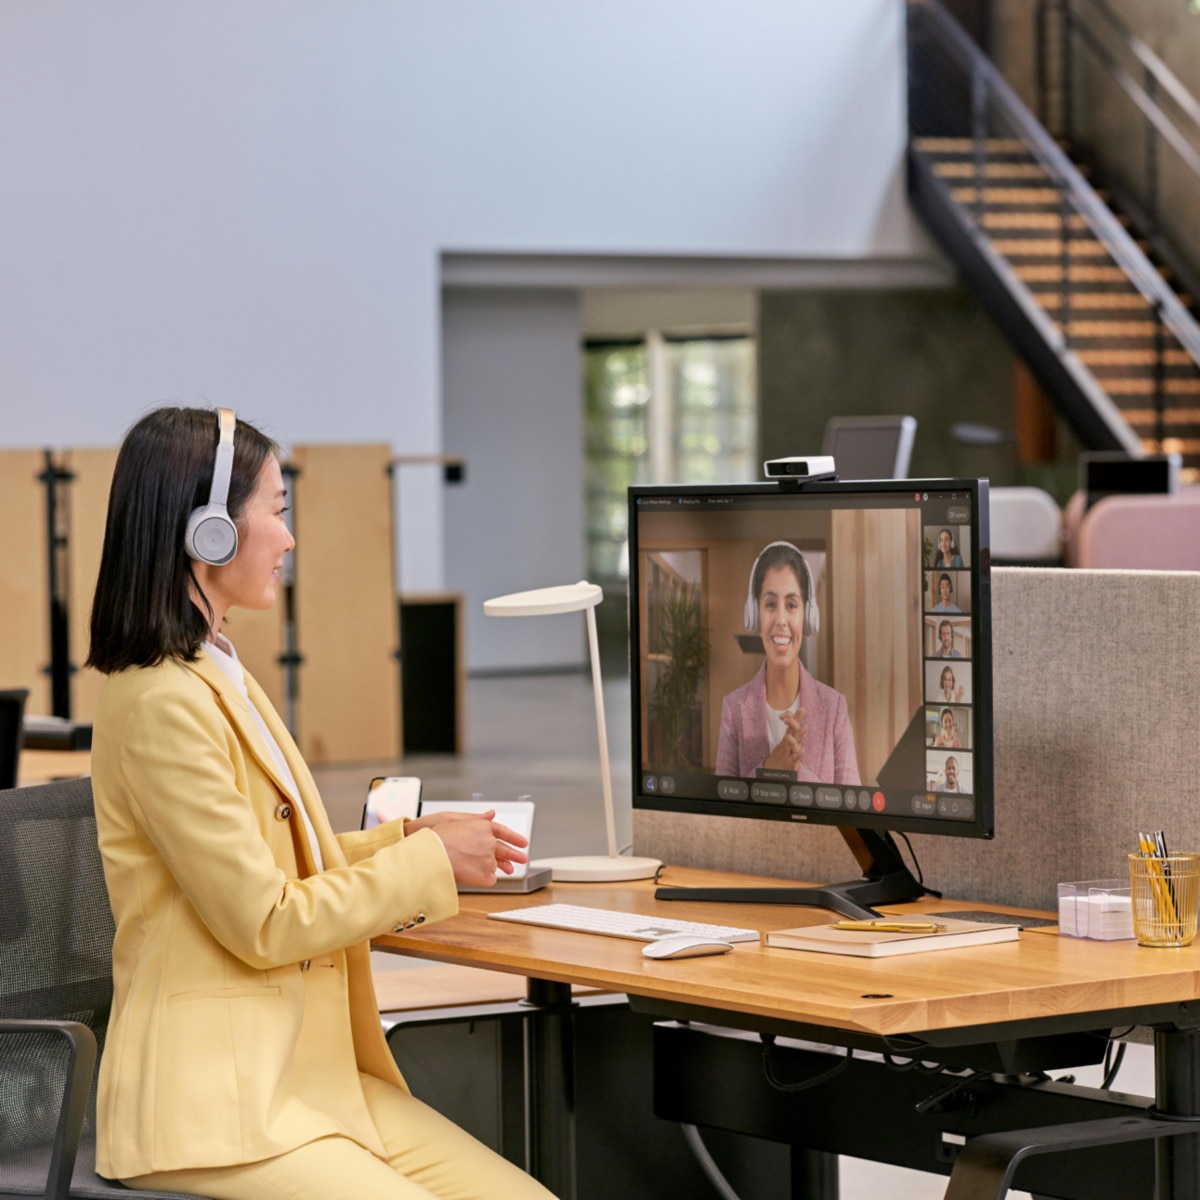 A professional in a pale yellow suit and a headset sits at a desk in an office, video conferencing with several colleagues.